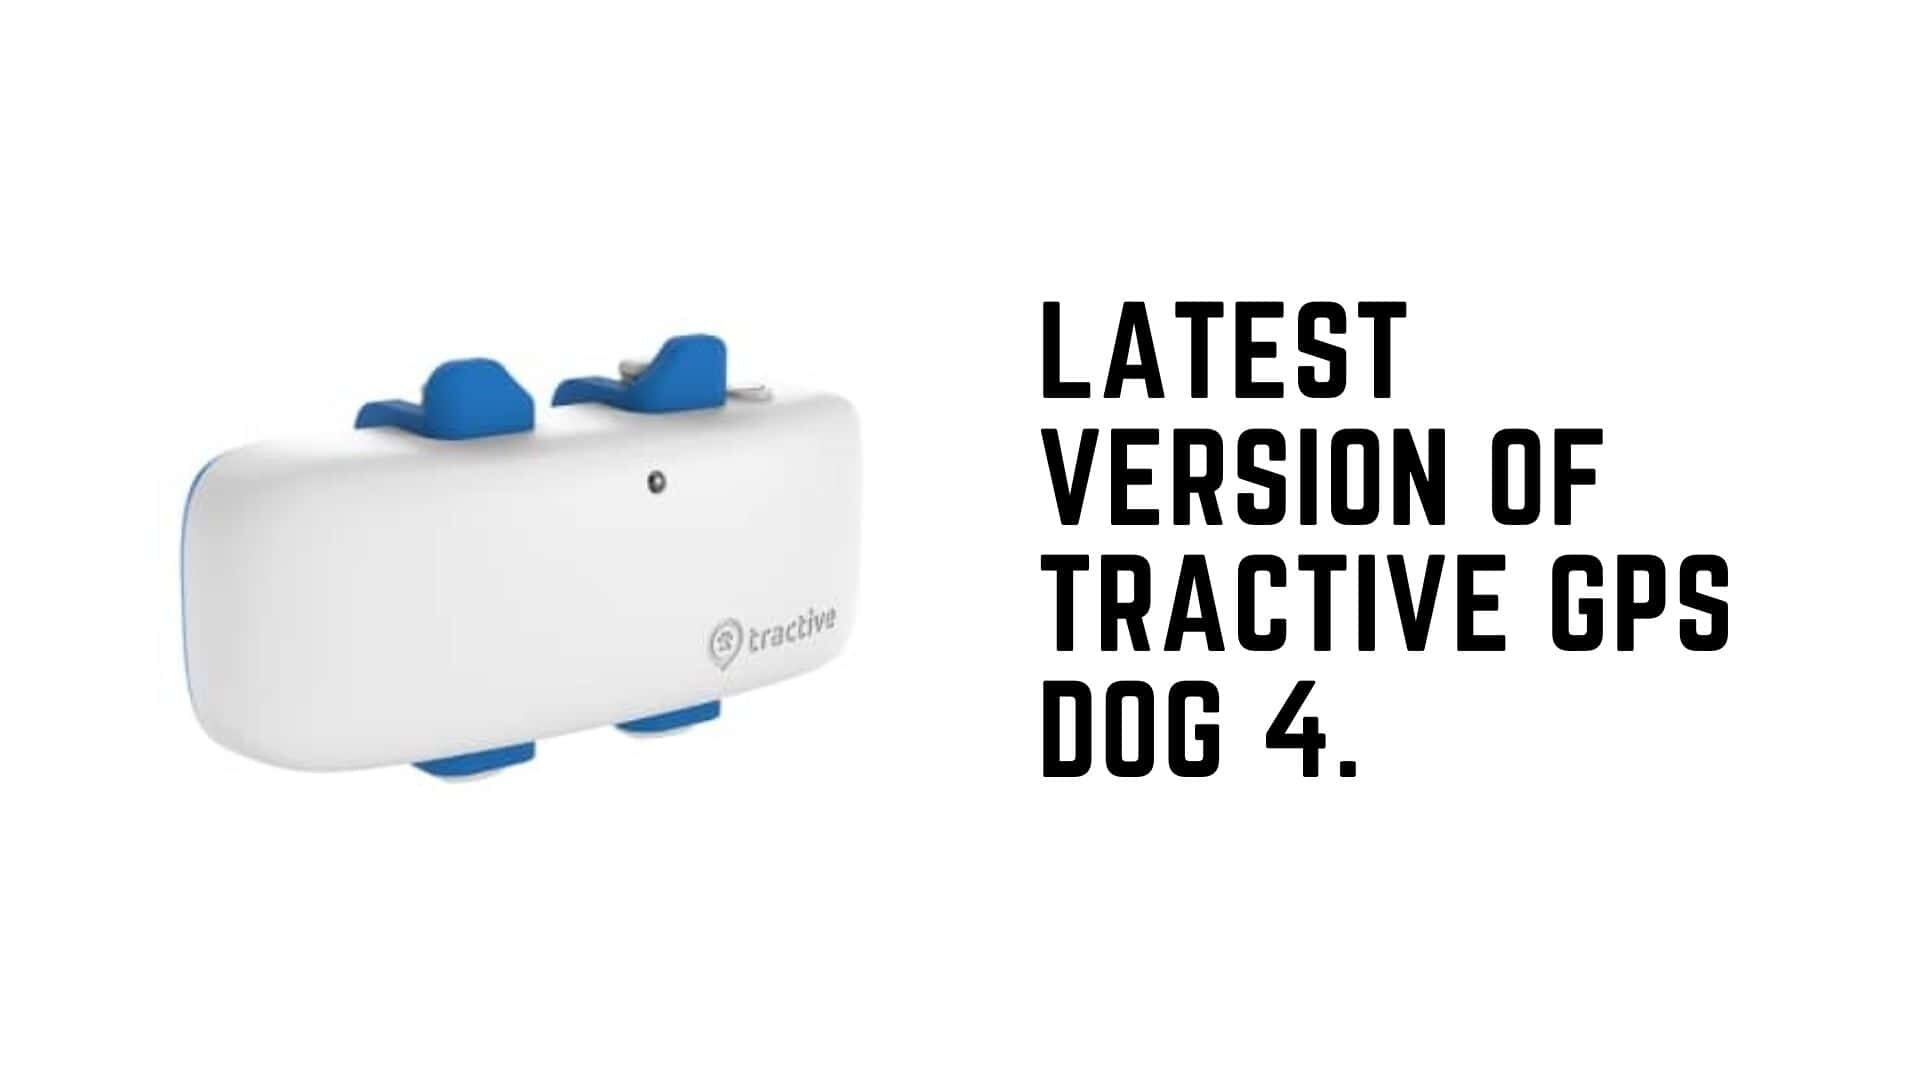 Latest version of Tractive GPS DOG 4. 